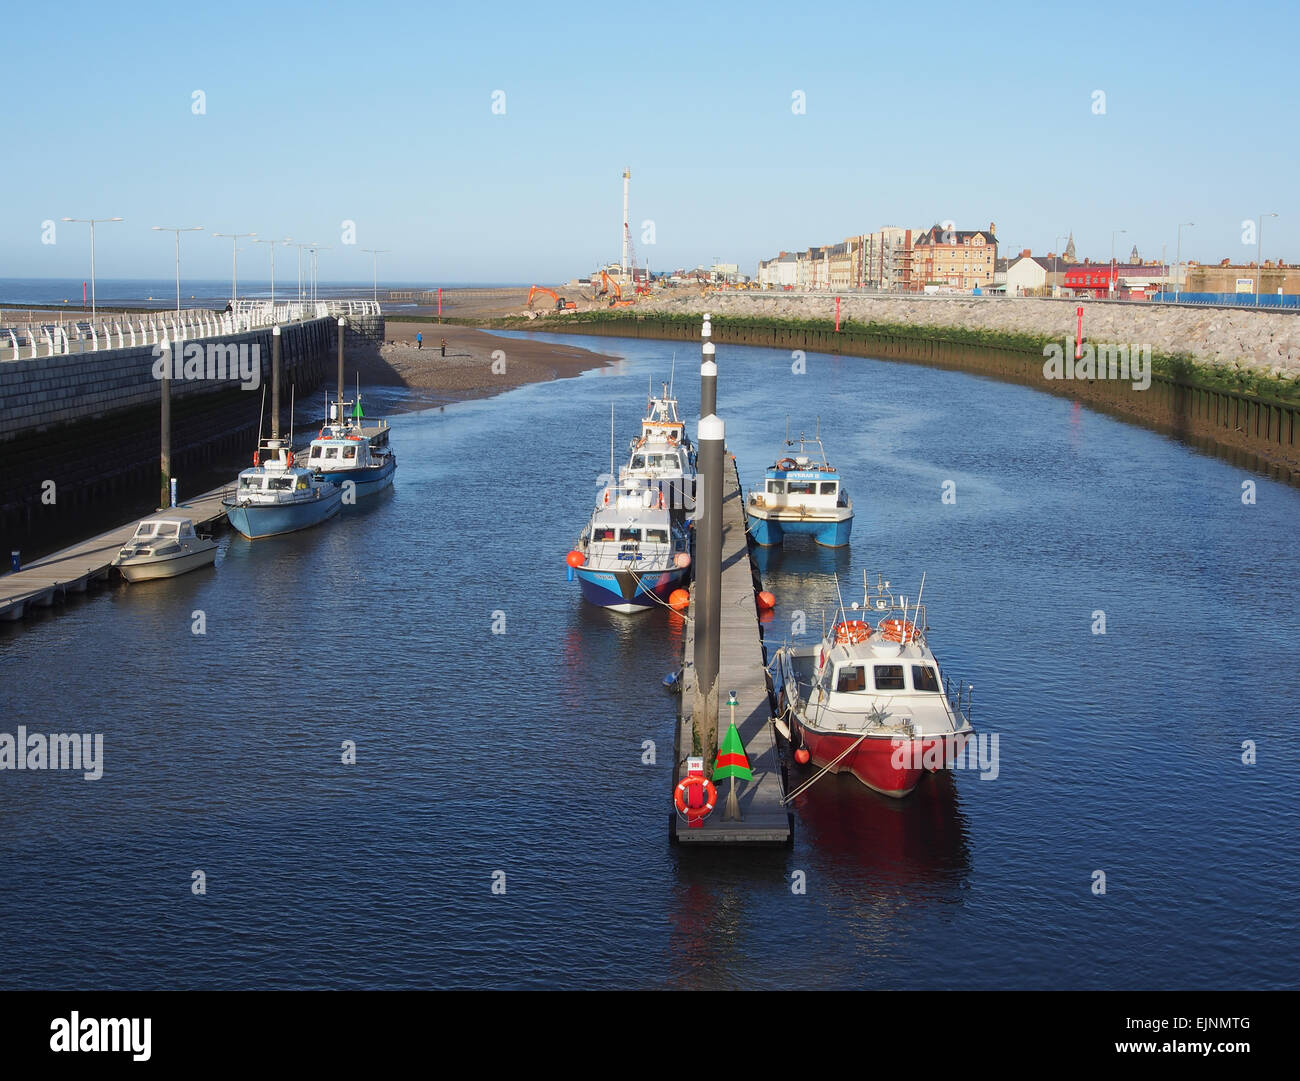 Boats moored at the marina in Kimnel Bay, Rhyl in Wales taken from the Dragon Bridge. Stock Photo